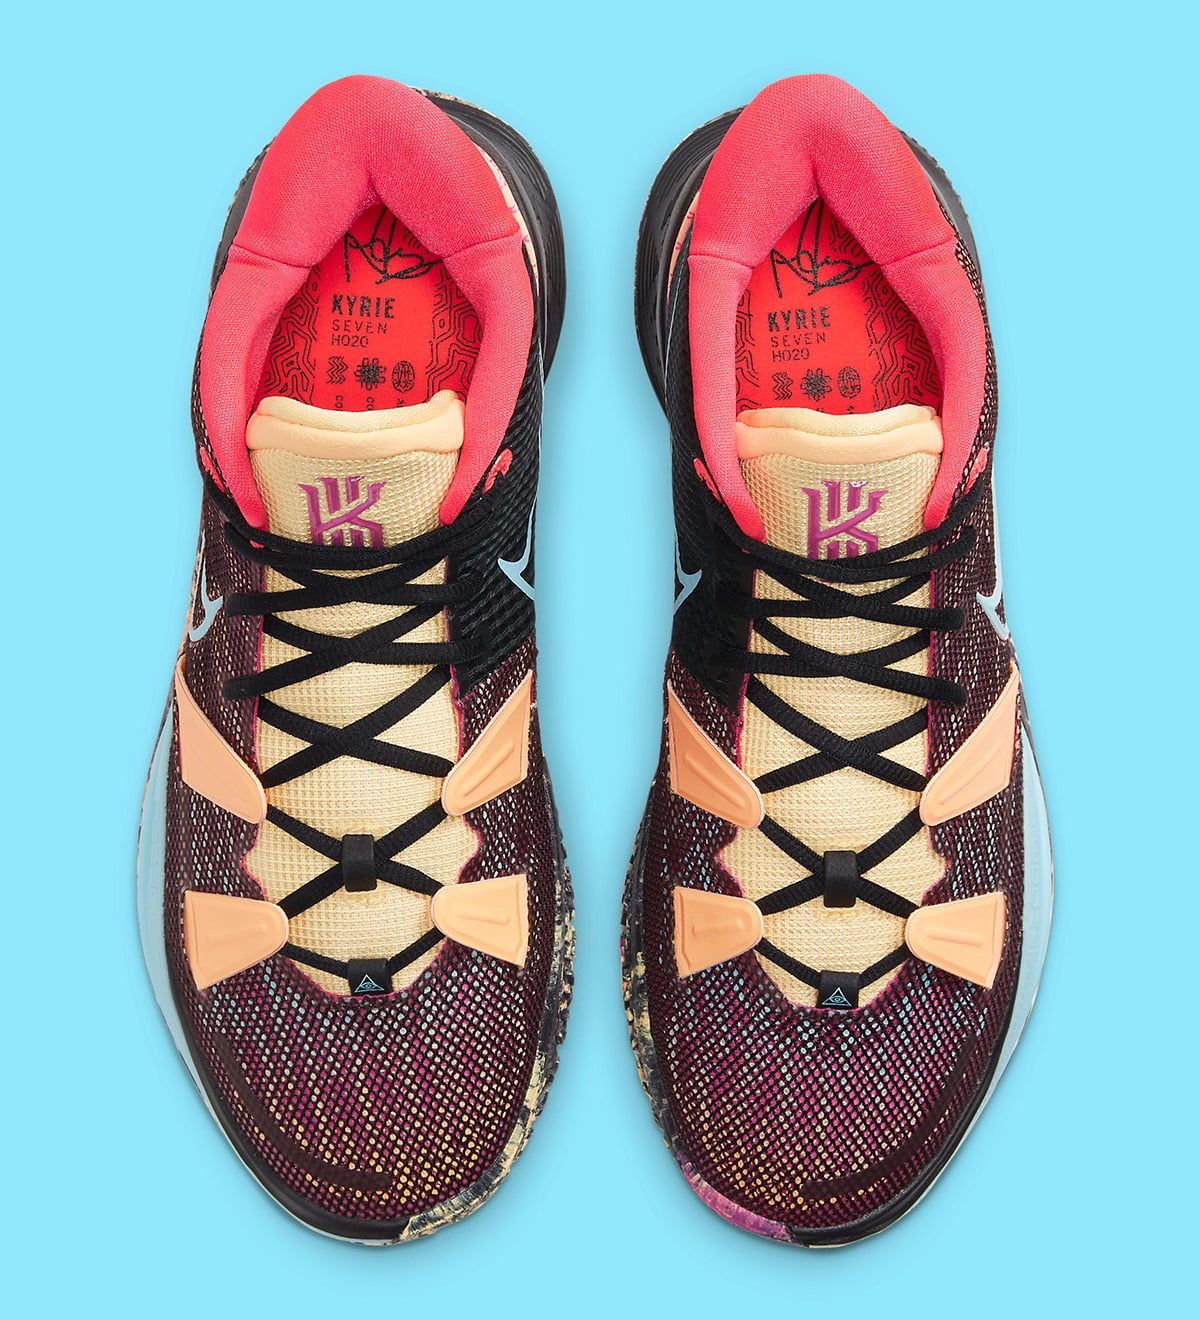 Nike to Kick-Off the Kyrie 7 with 